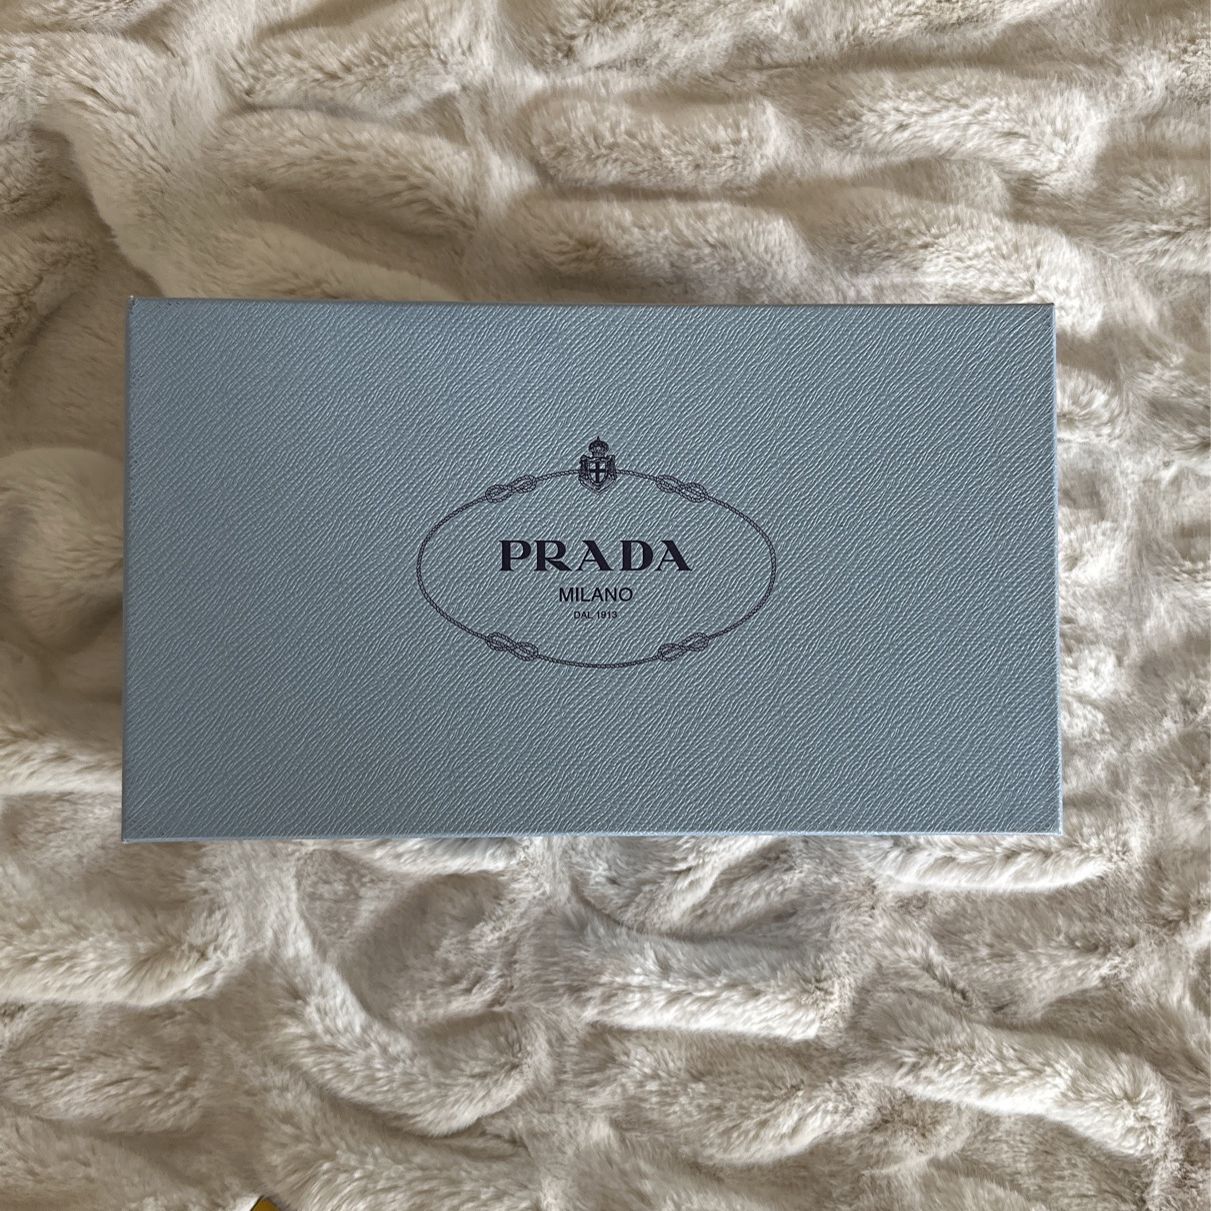 PRADA SHOE BOX Empty for Sale in West Hollywood, CA - OfferUp